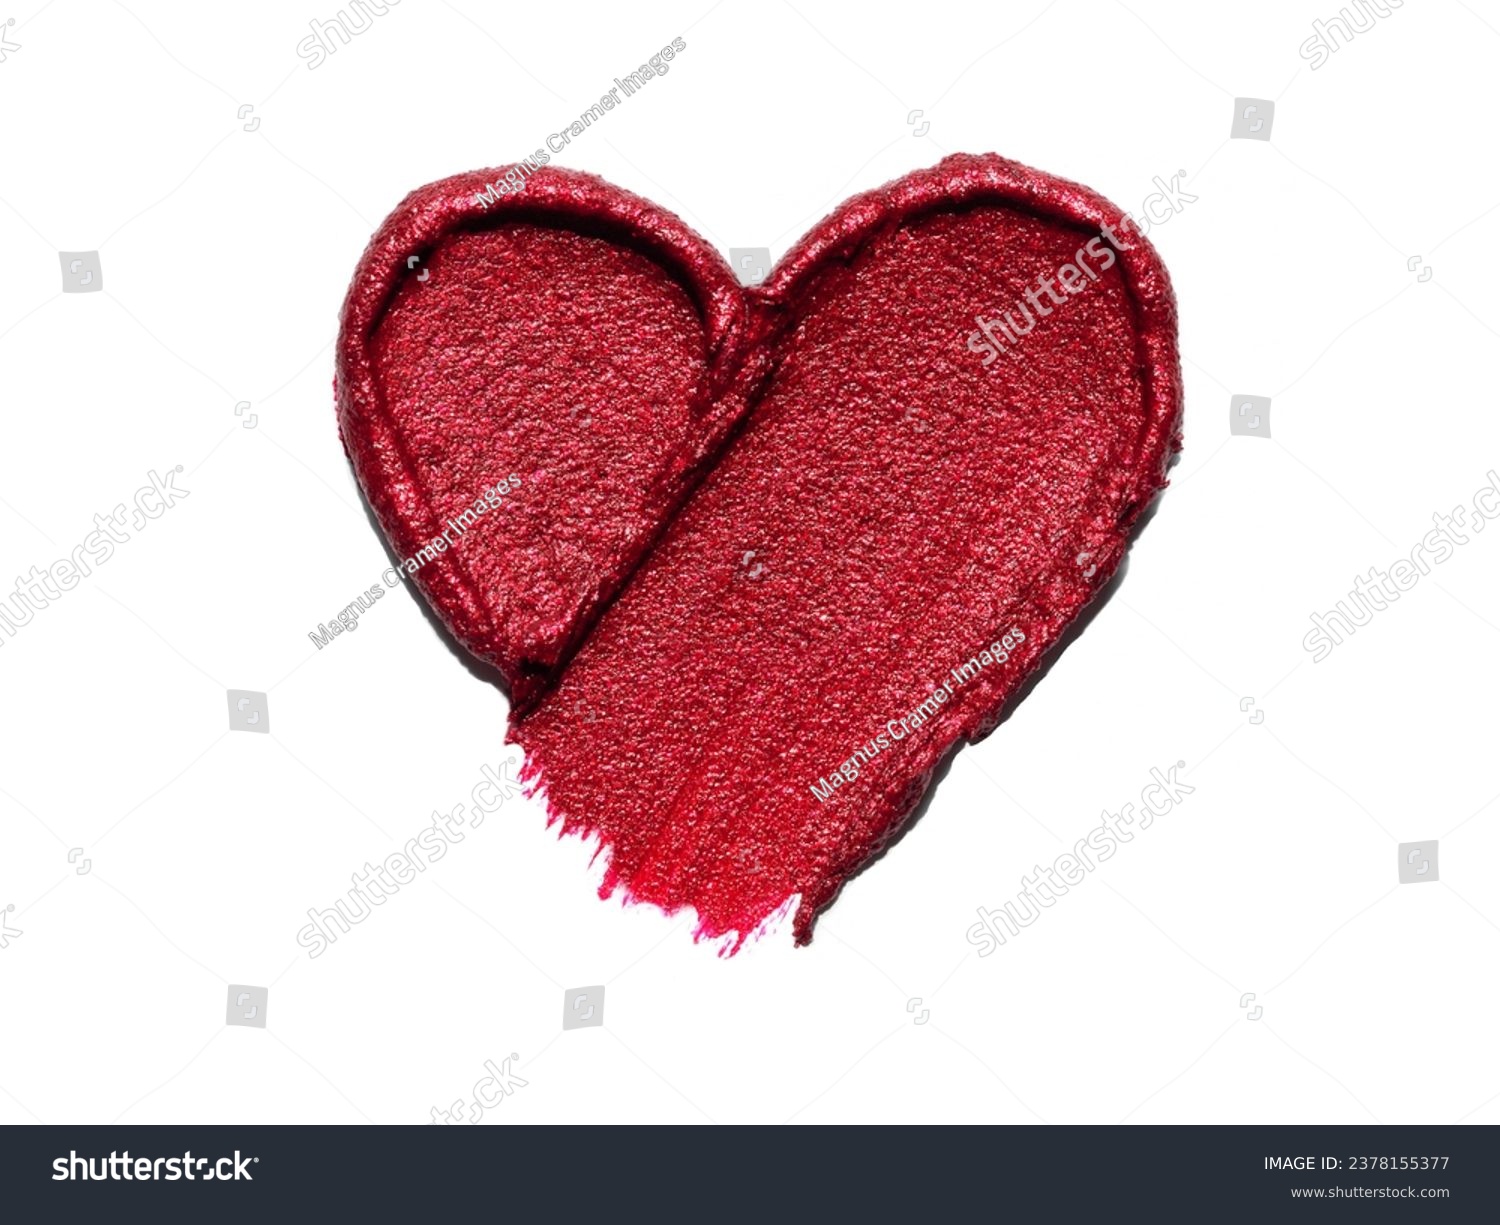 Red lipstick shimmering texture in heart shape, texture stroke isolated on white background. Cosmetic product smear smudge swatch #2378155377